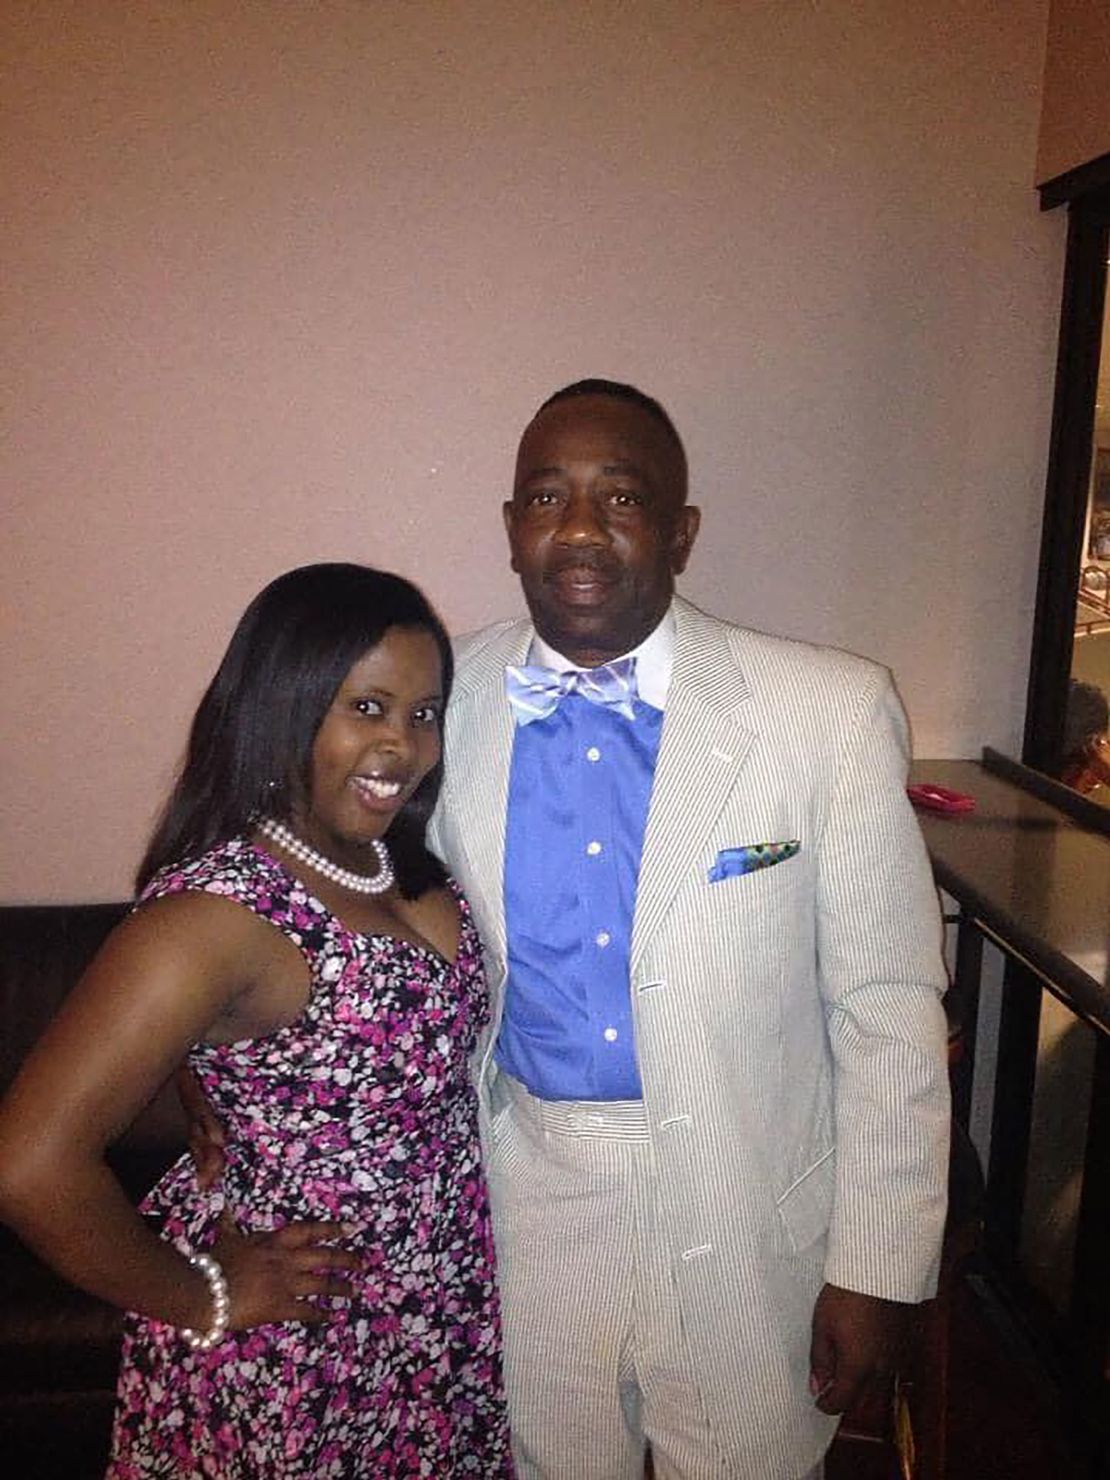 Ashlye Wilkerson with her father, Anthony "Tony" Geddis, at one of the many functions they attended together.